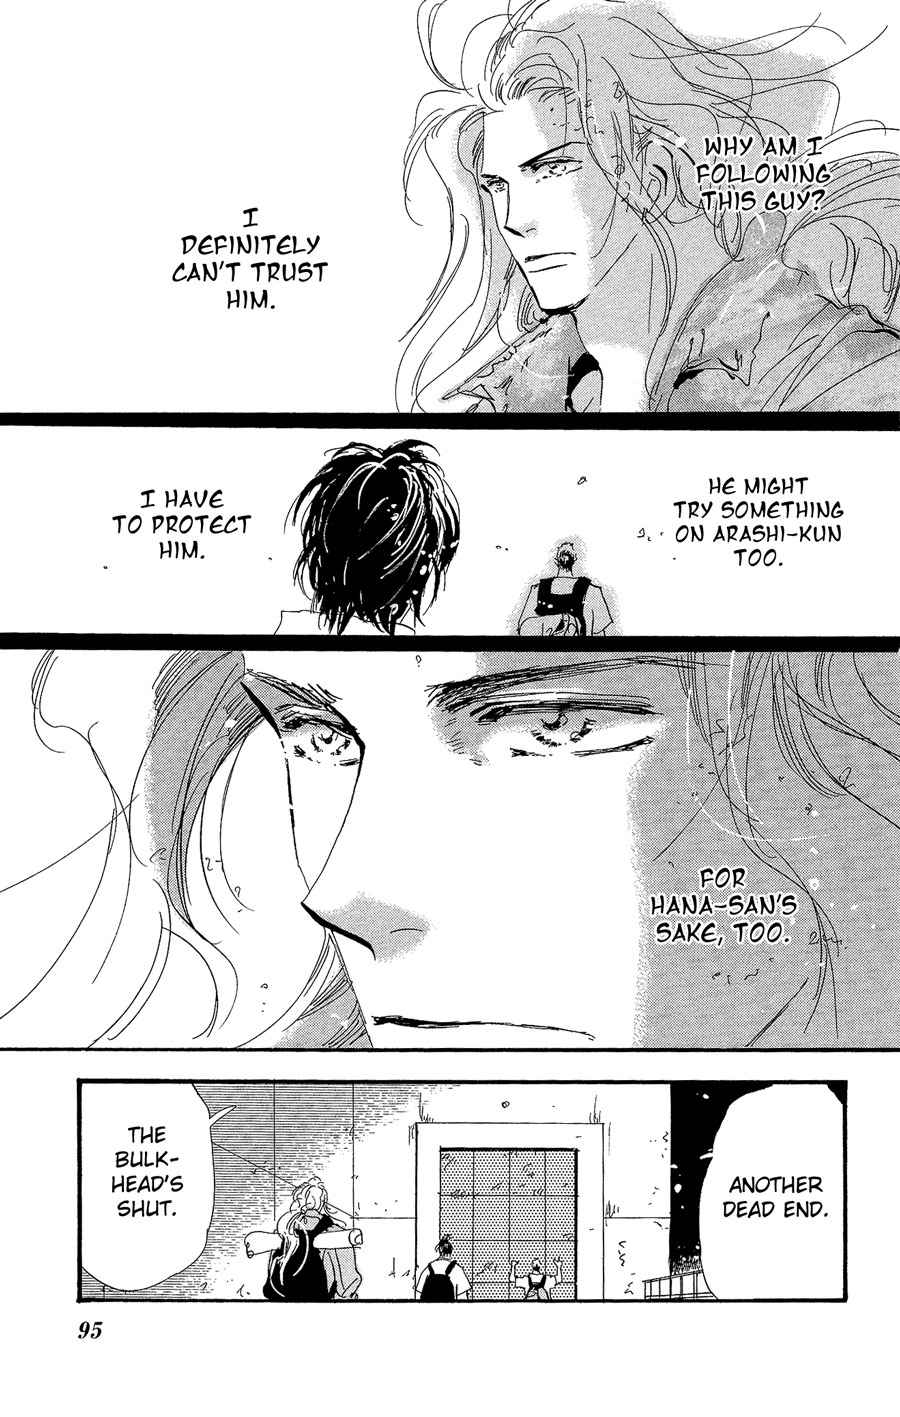 7 Seeds Vol. 30 Ch. 154 Mountains Chapter 19 [The Three of Them]